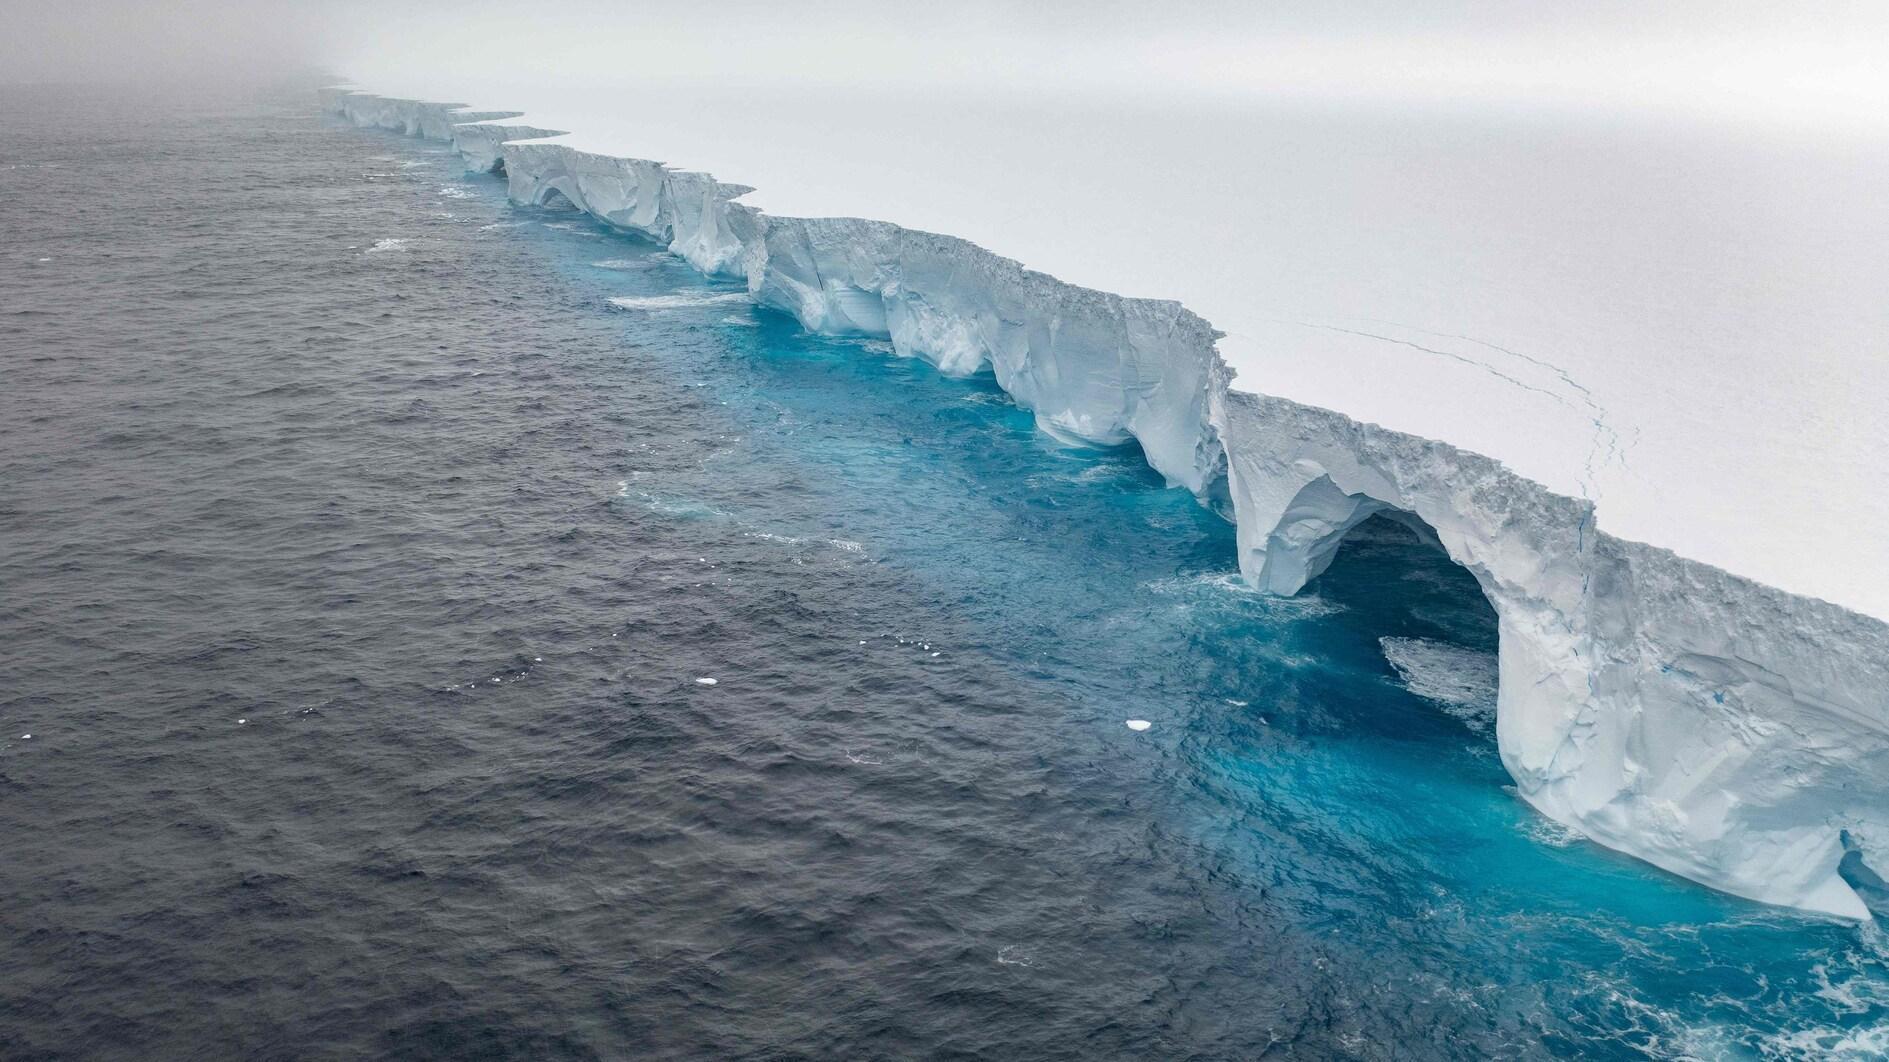 World's biggest iceberg 'battered' by waves as it heads north - World News